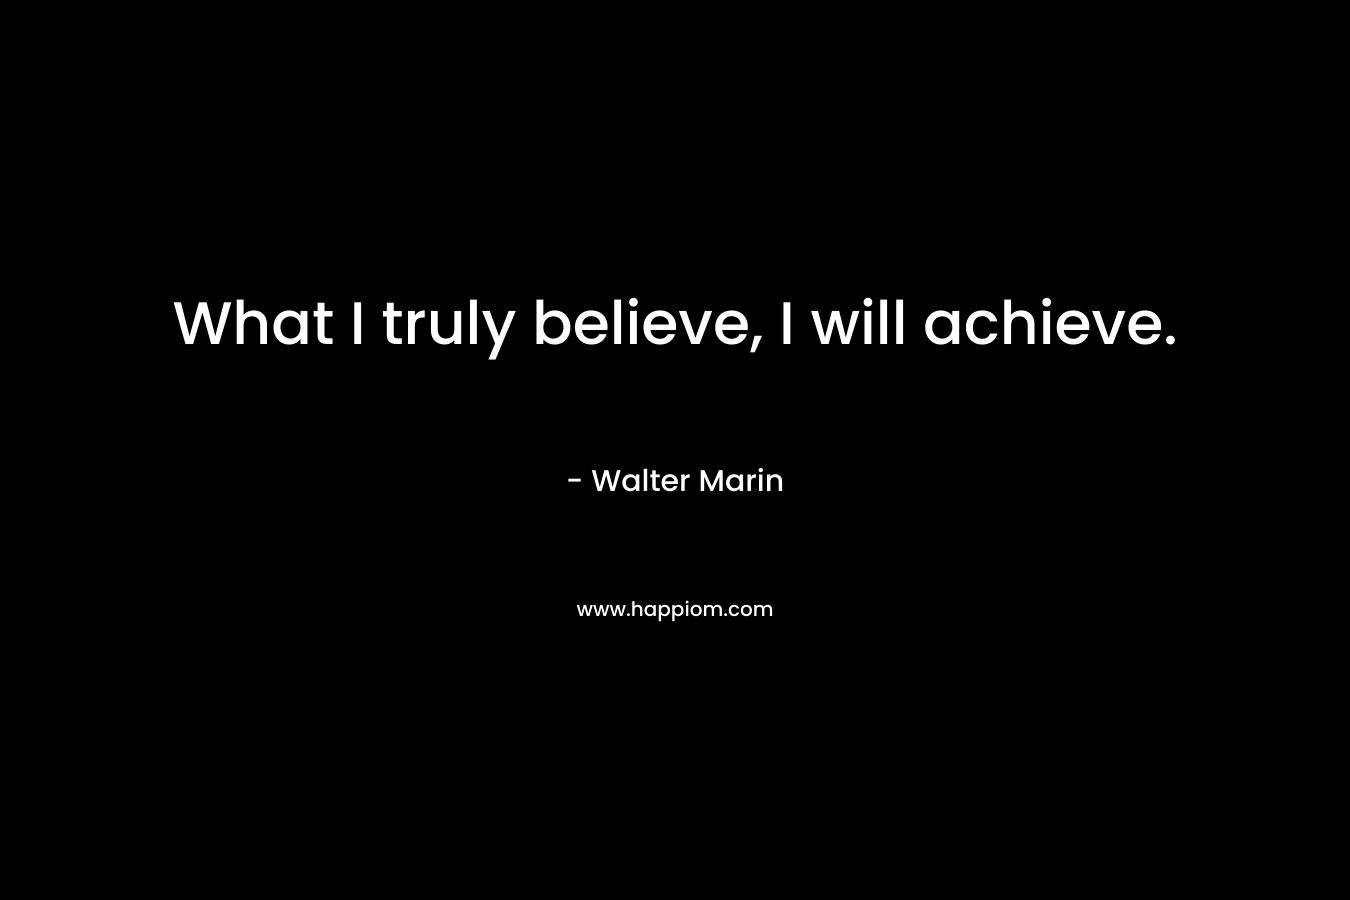 What I truly believe, I will achieve. – Walter Marin